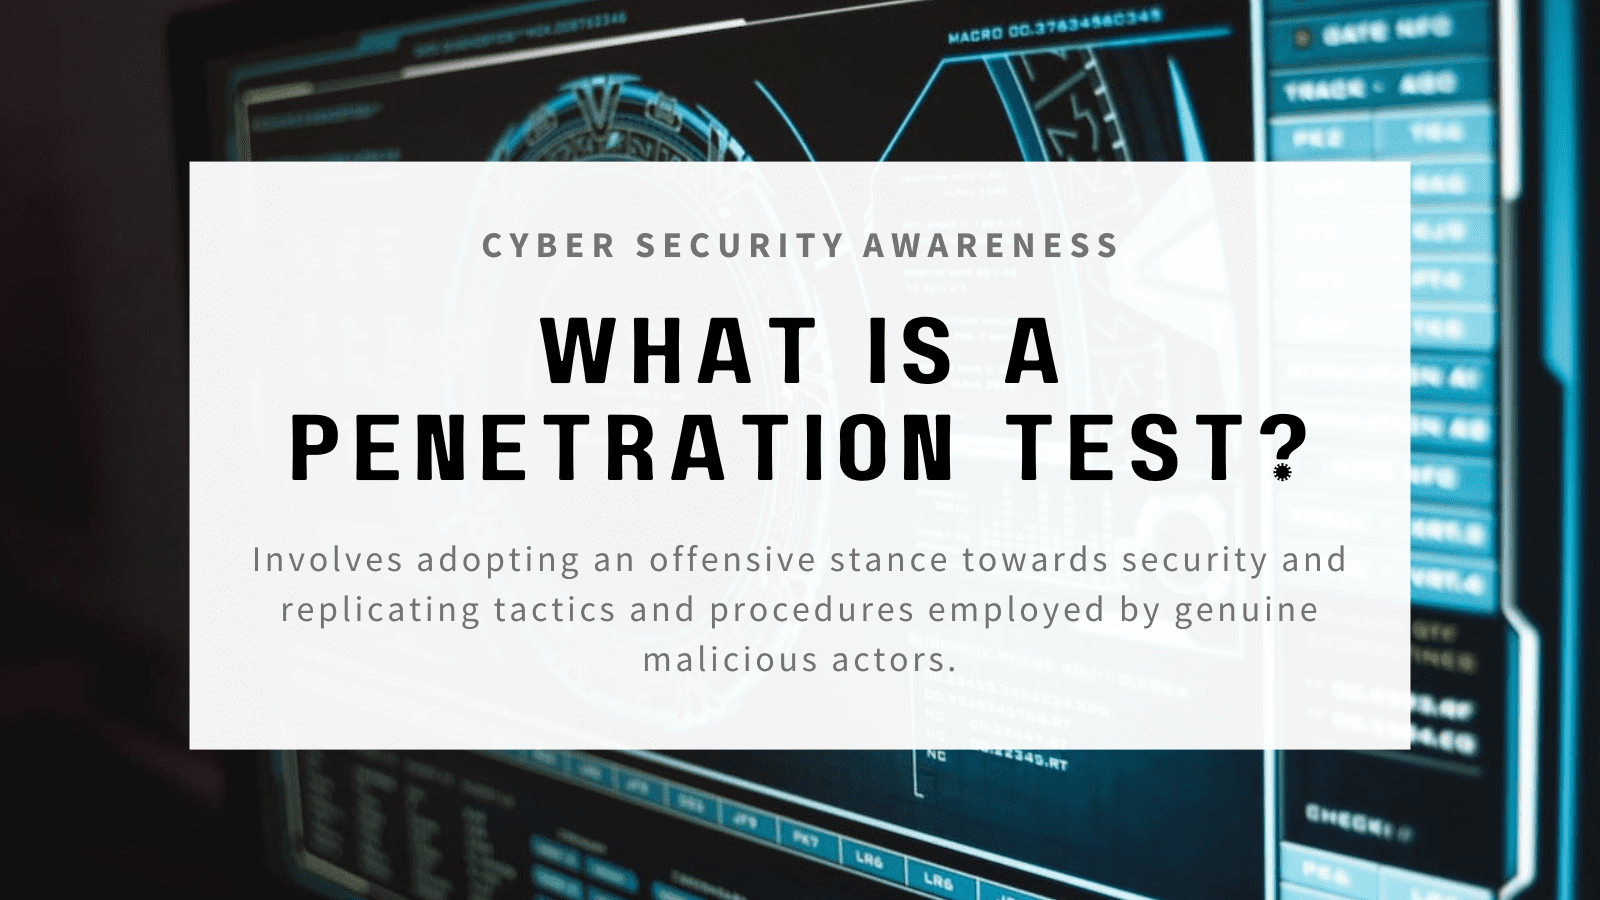 What is a Penetration test?